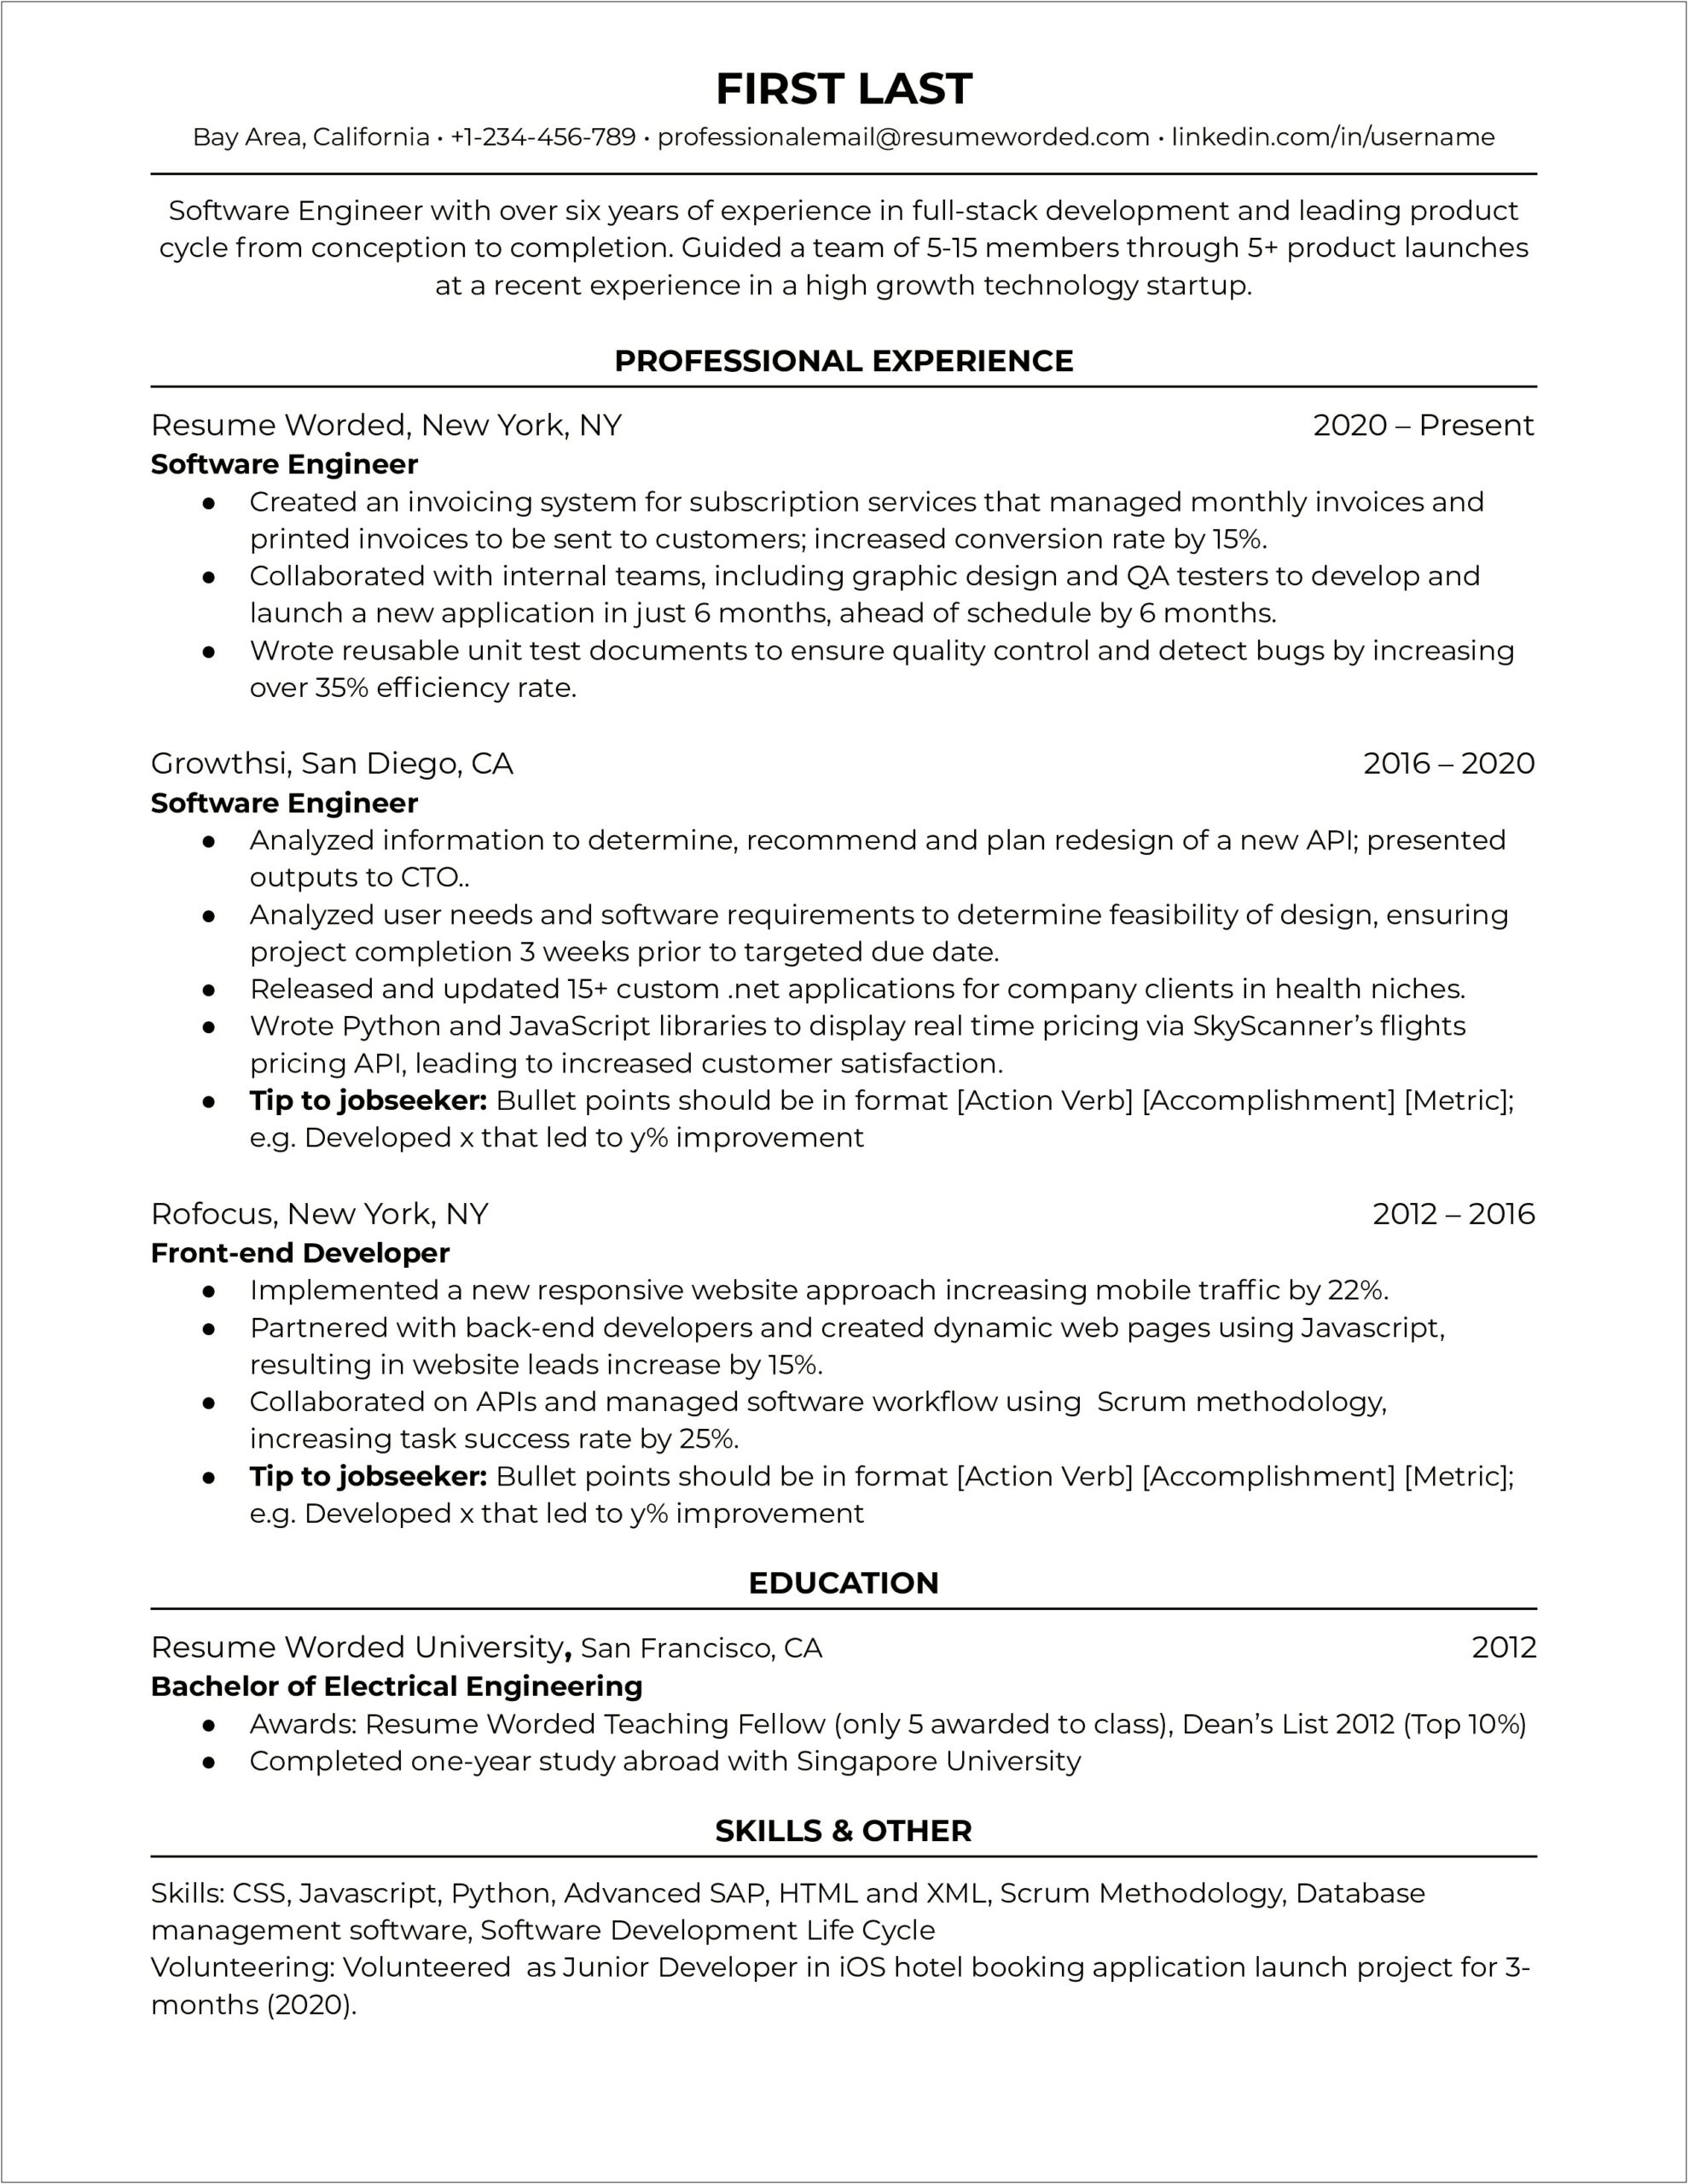 Sap Security Resume 5 Years Experience